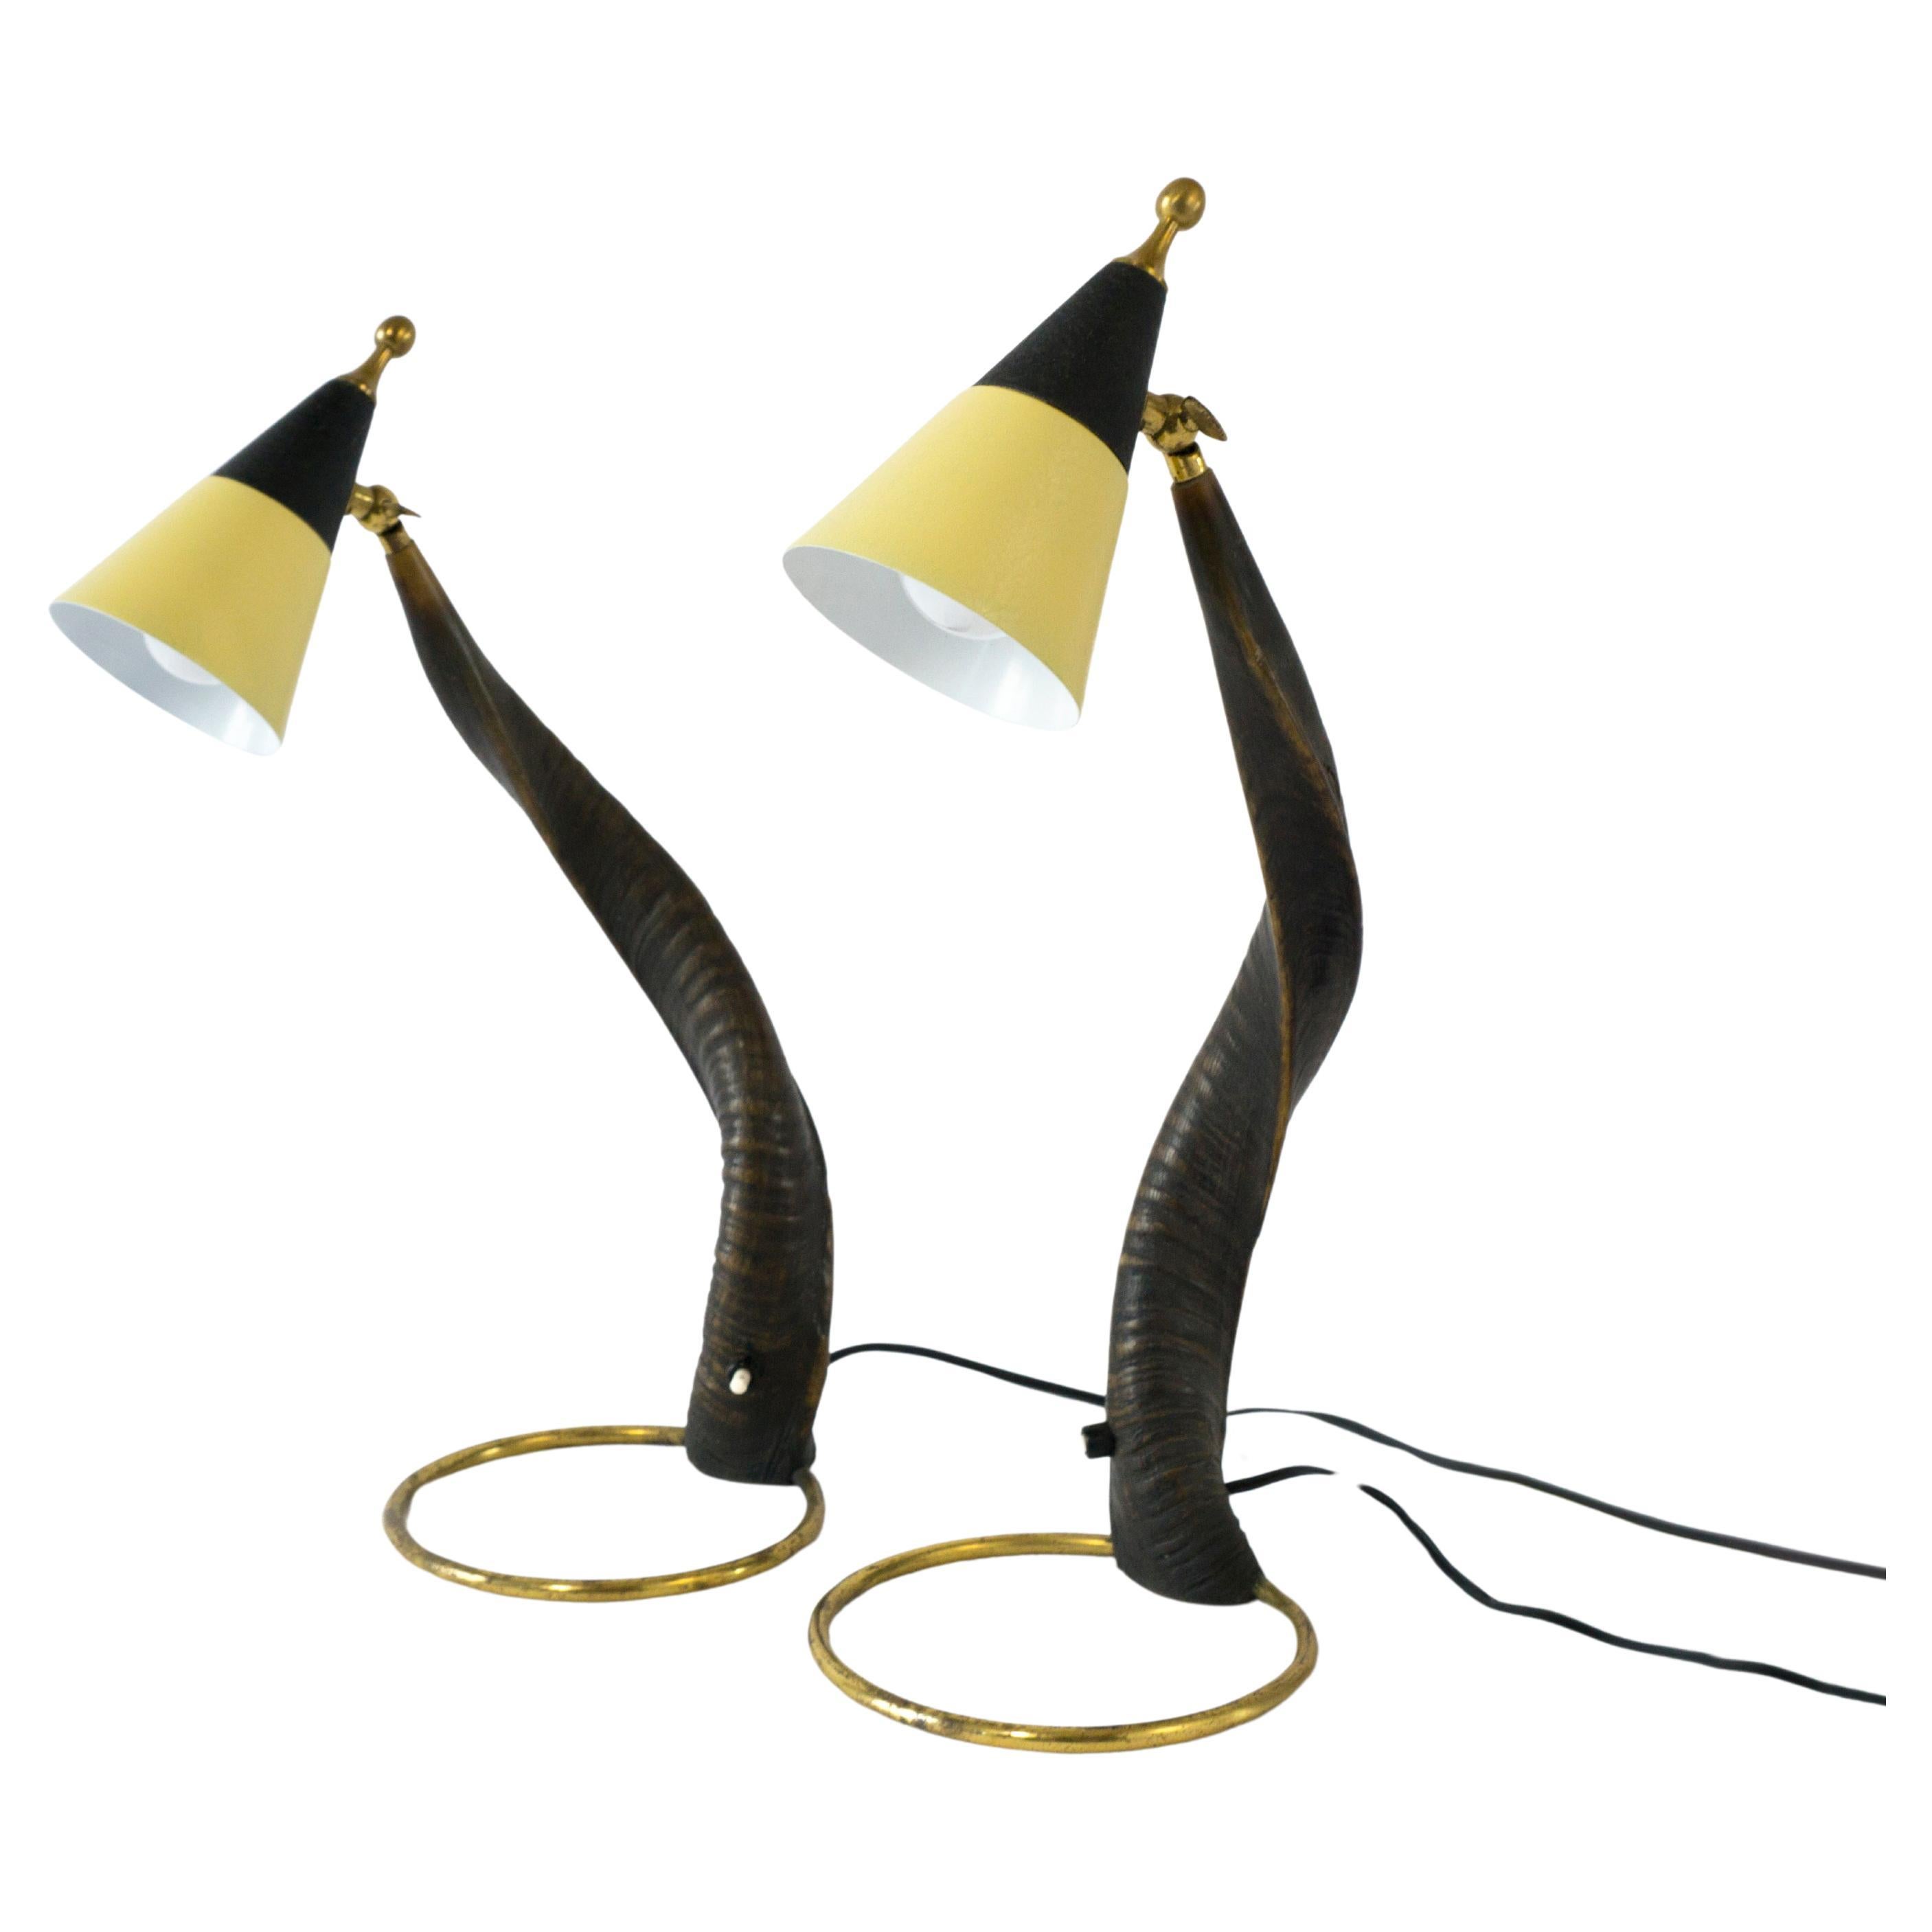  Pair of Vintage Mid Century 1950s Horn & Brass Bedside Table Lamps For Sale